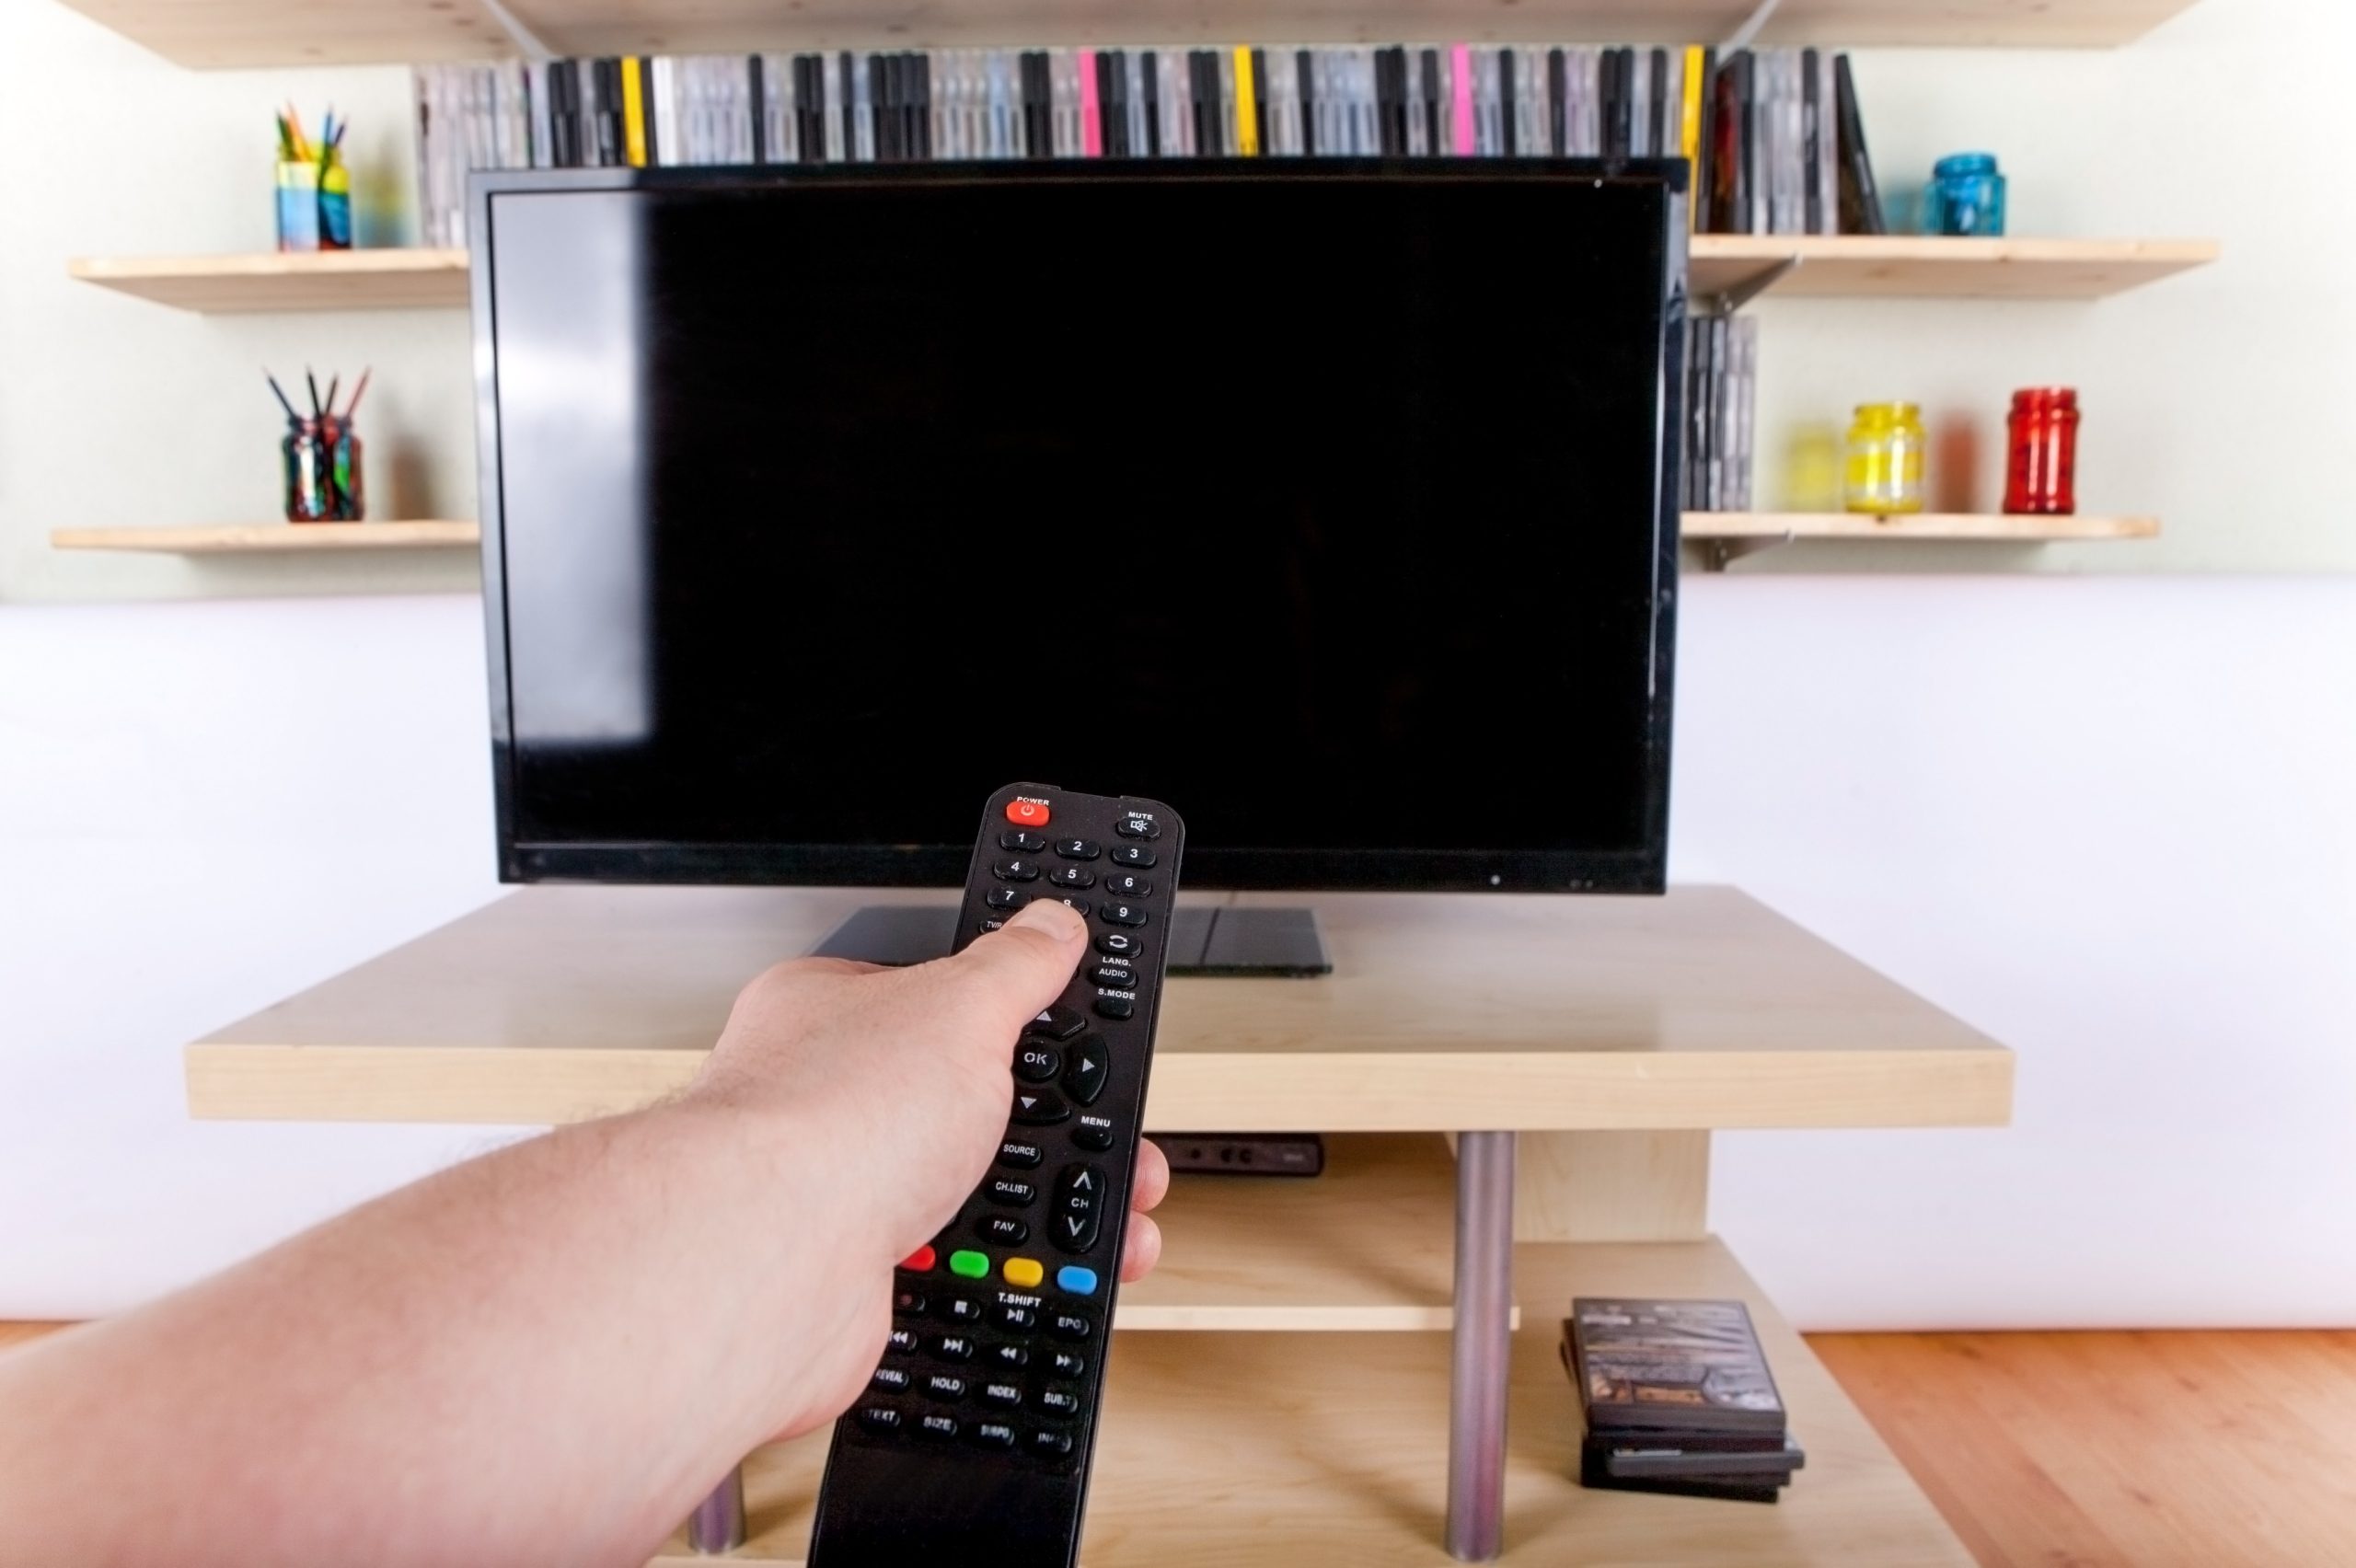 Hand using remote control in front of the TV